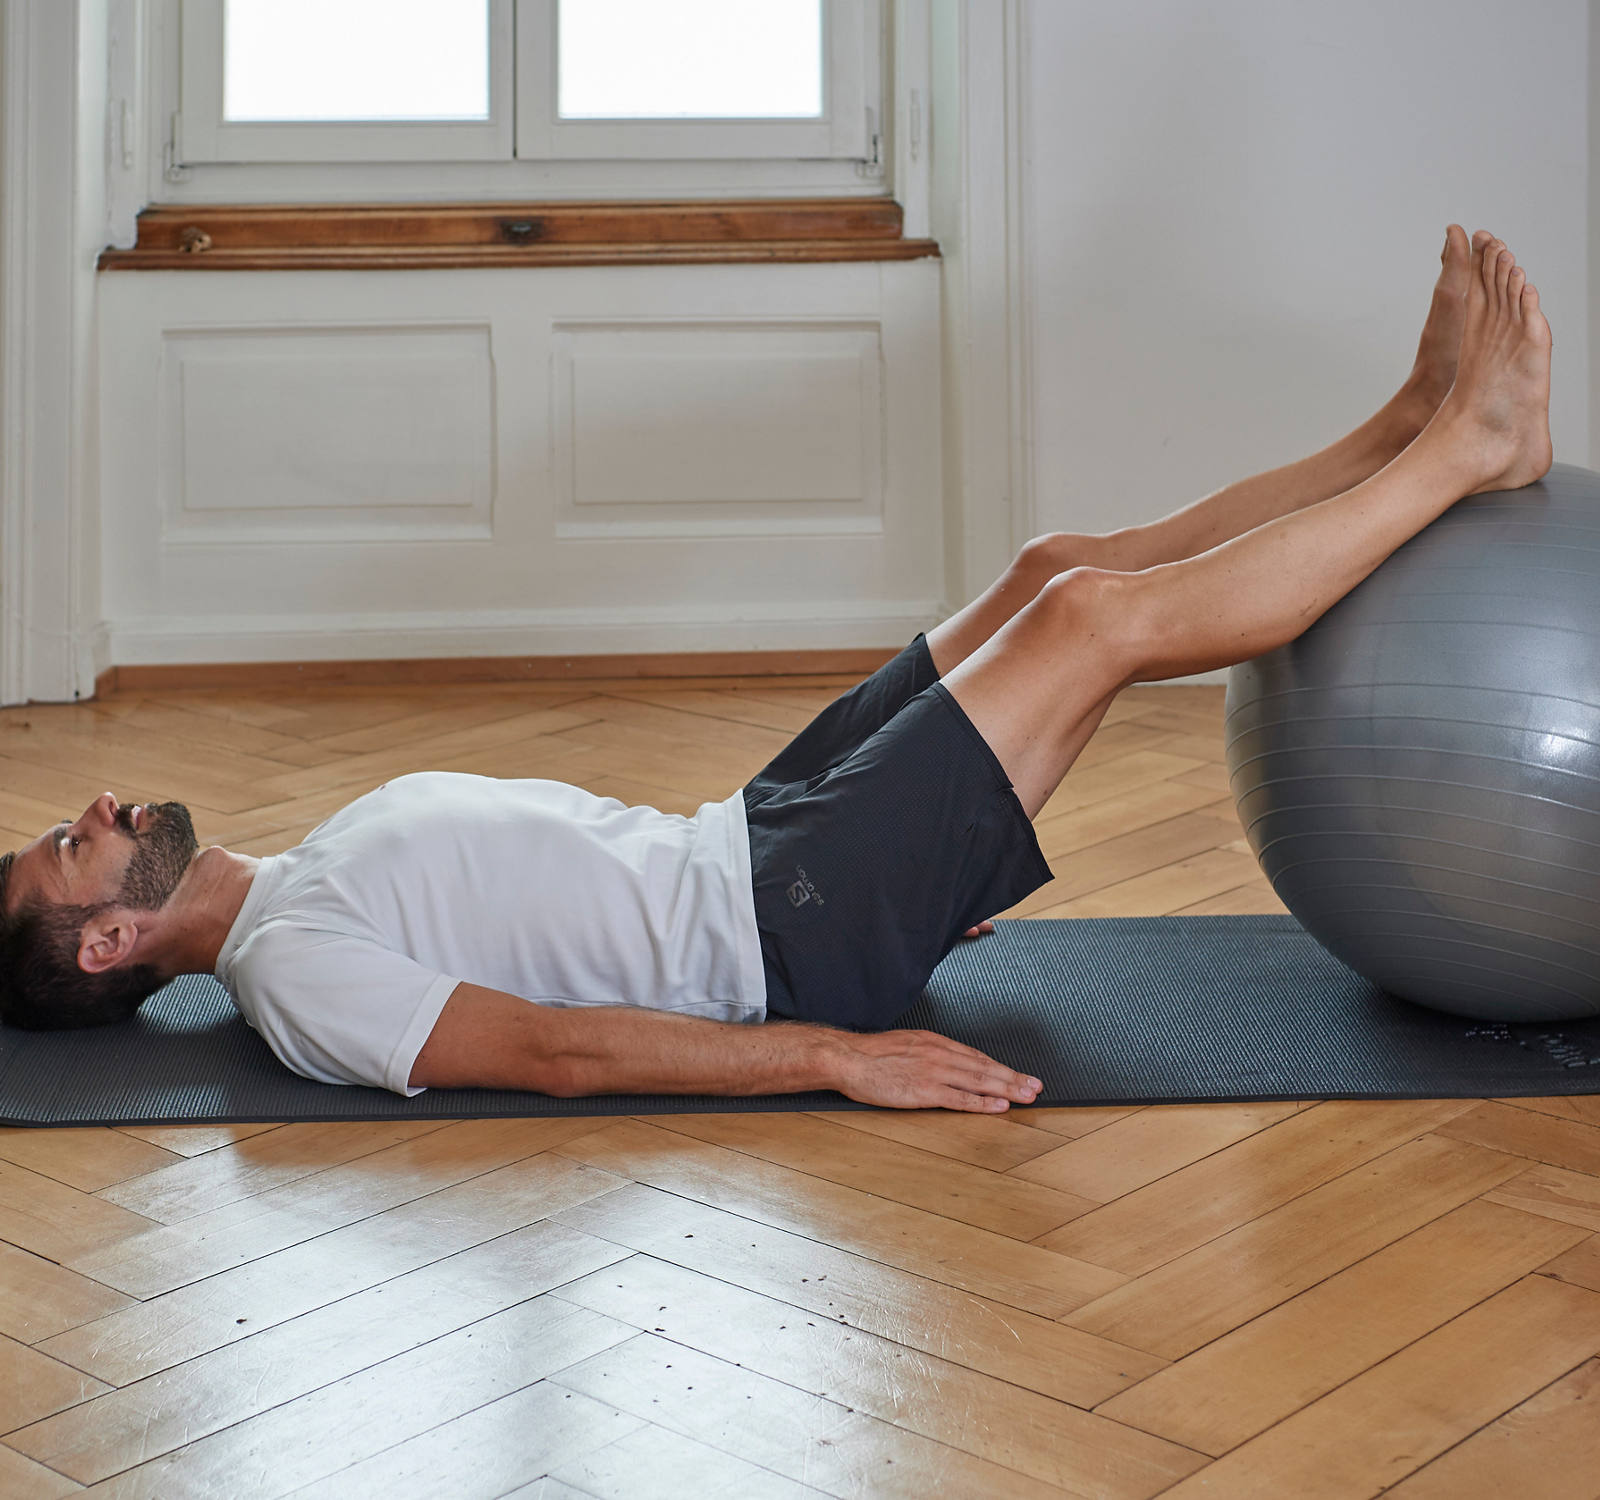 I have lower back pain. Should I seat on a stability ball at the